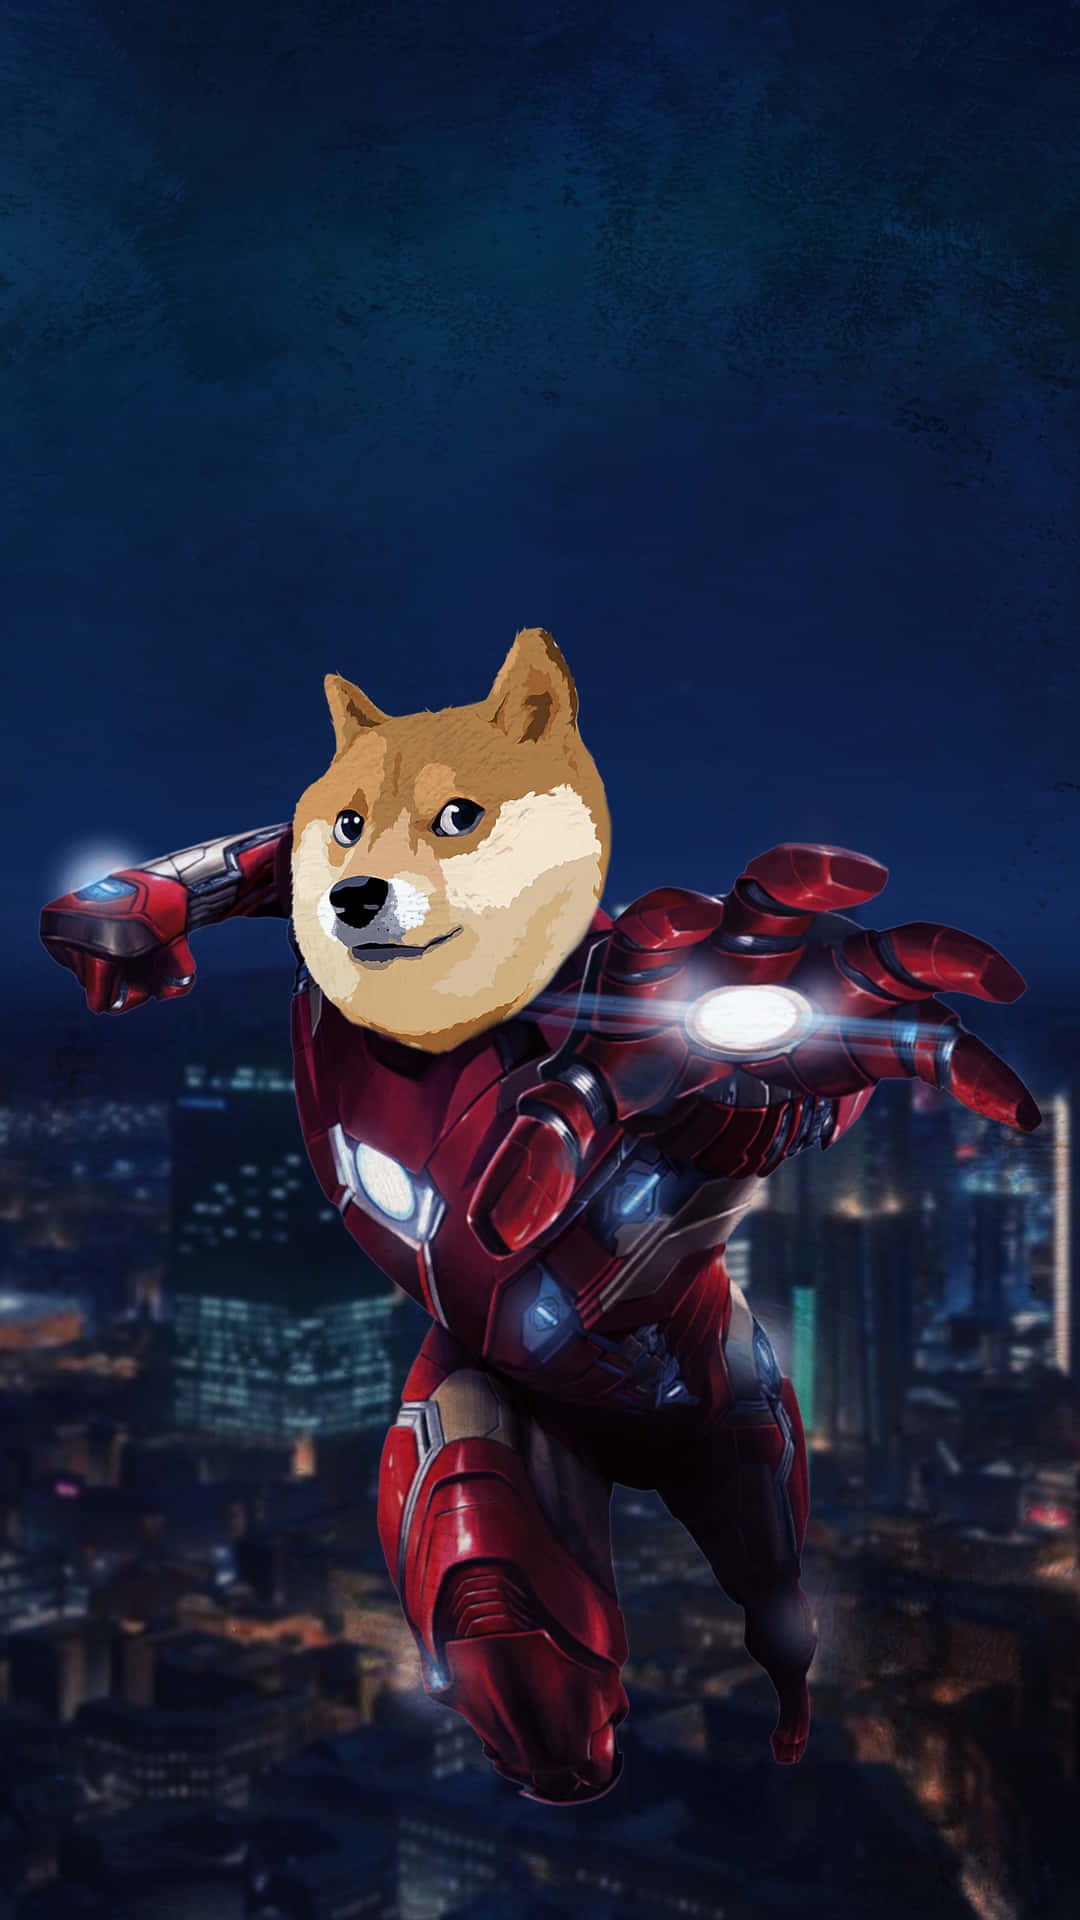 Dogeiron Man Would Be Translated To 